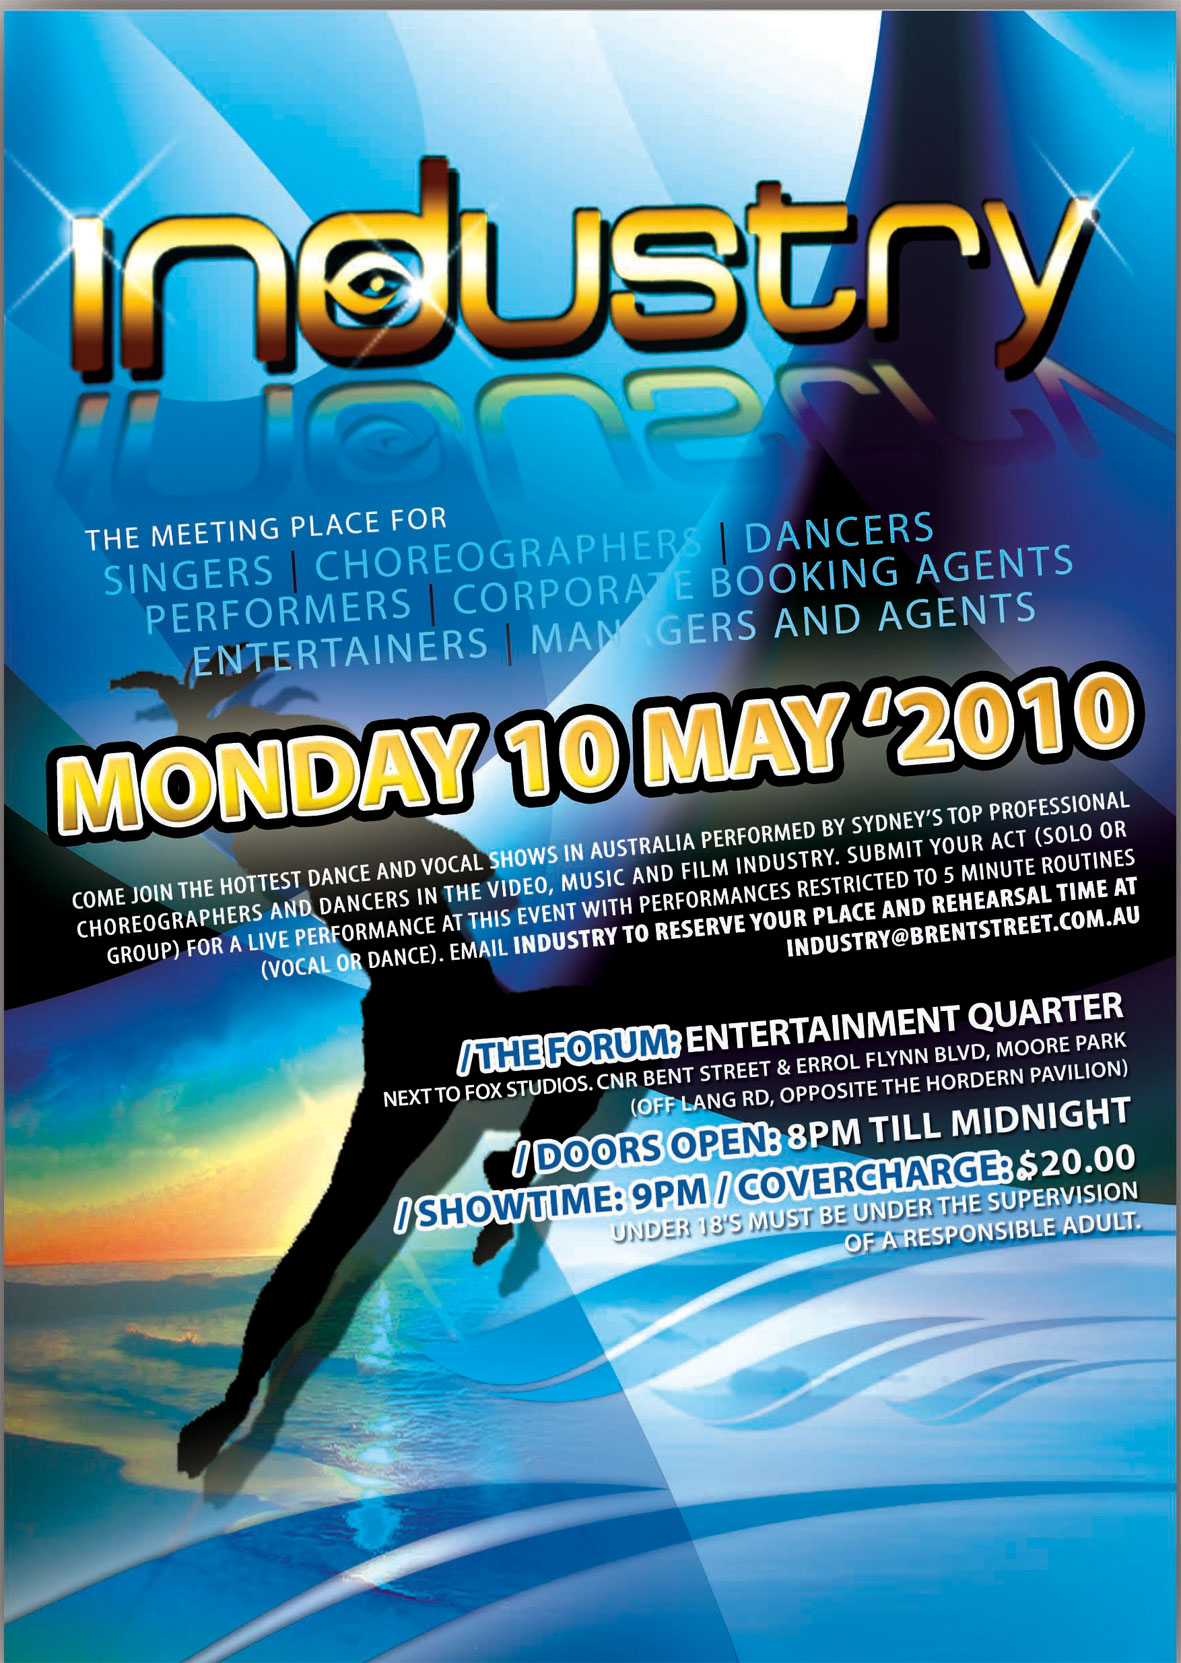 DANCE AT INDUSTRY SYDNEY